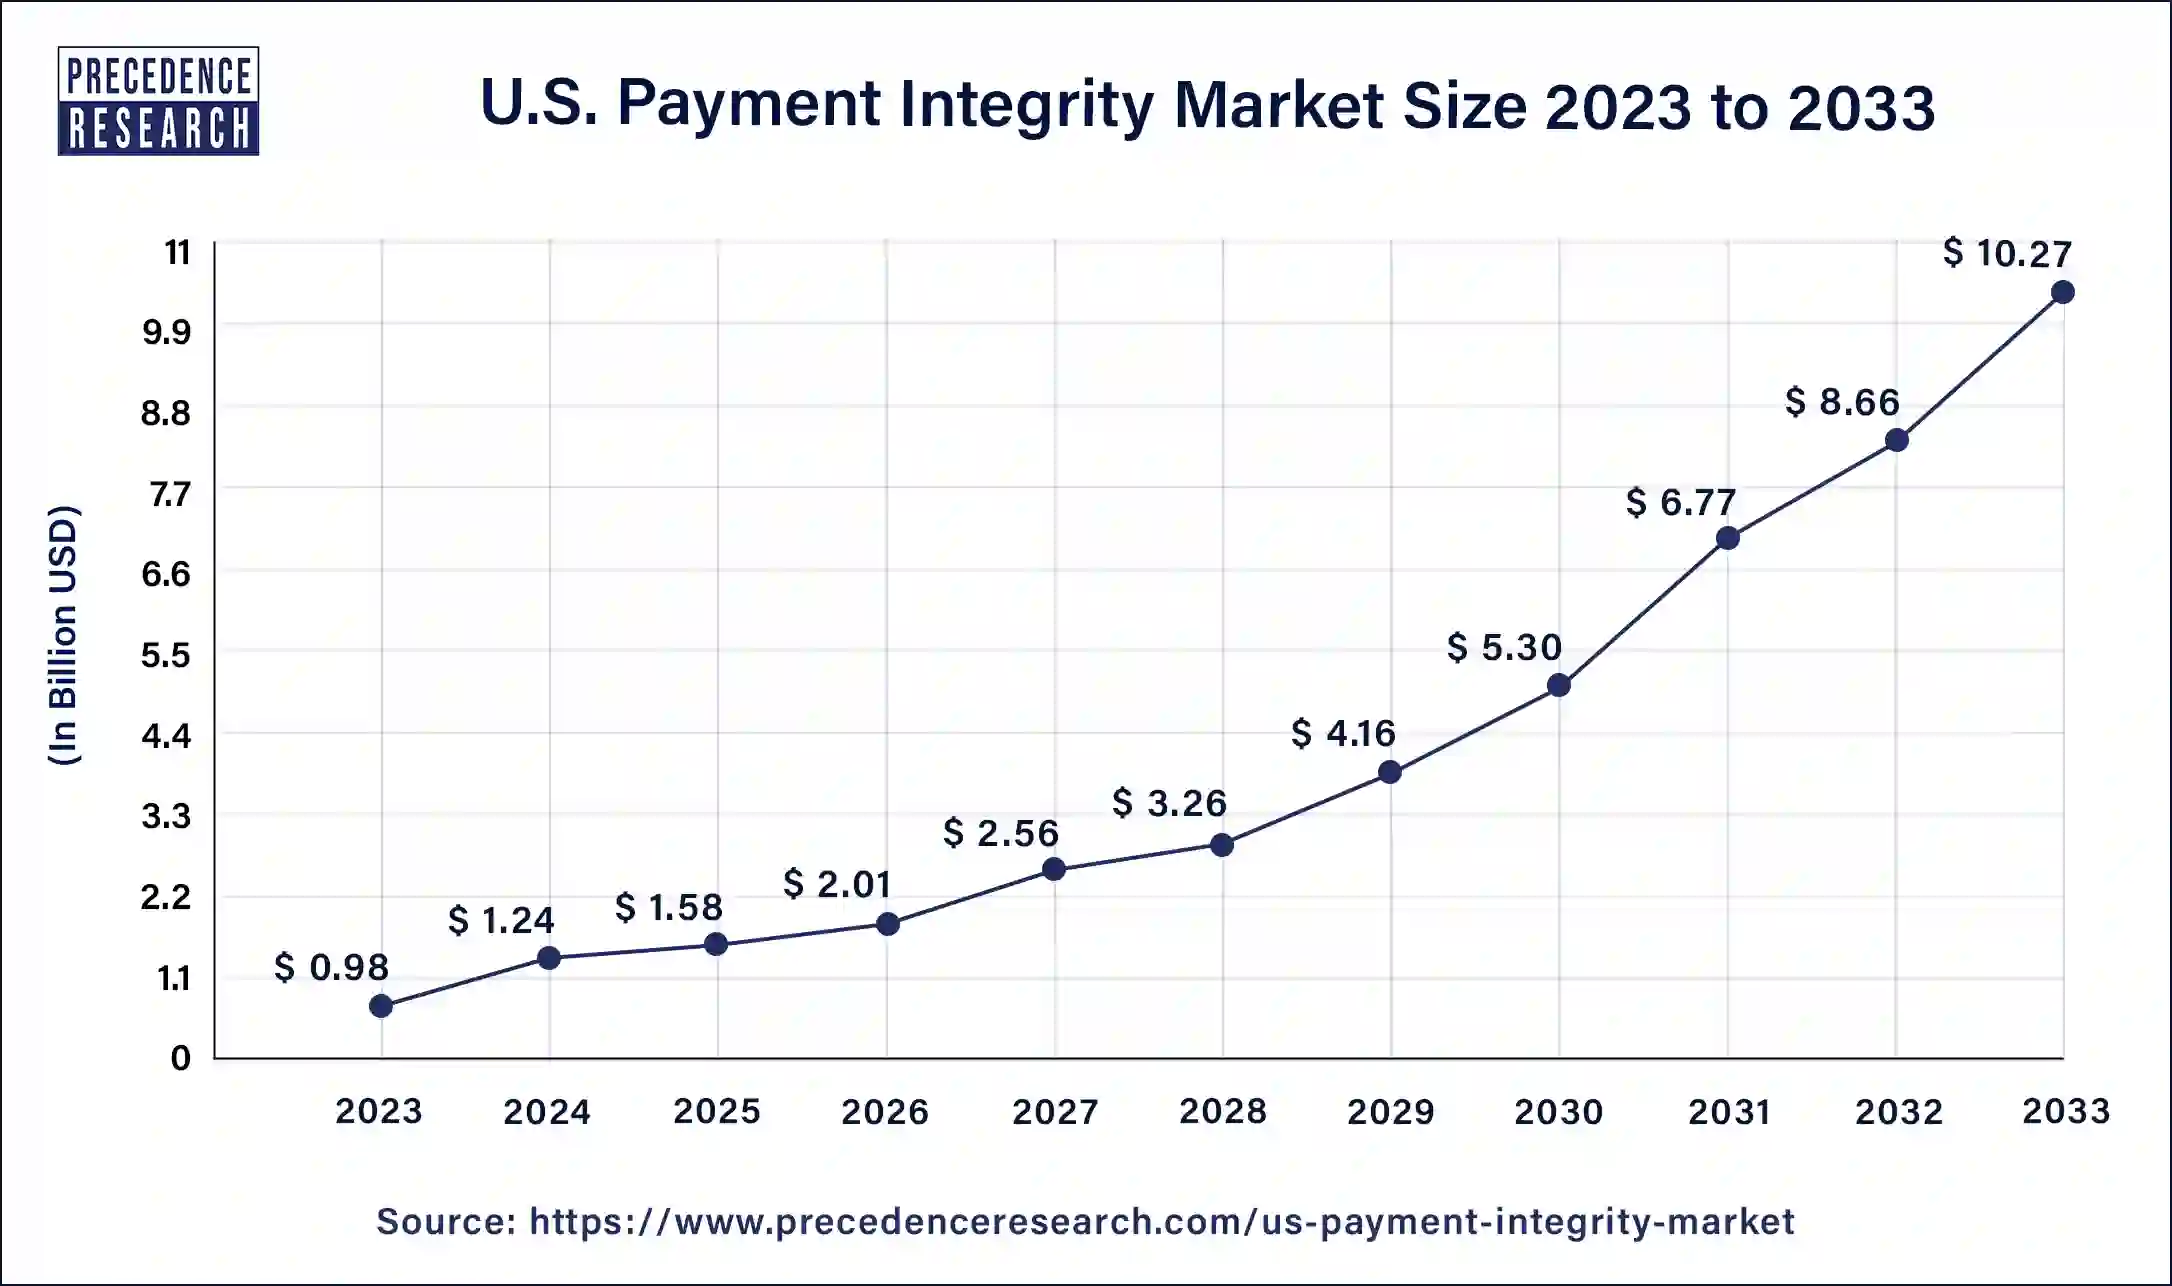 U.S. Payment Integrity Market Size 2024 To 2033